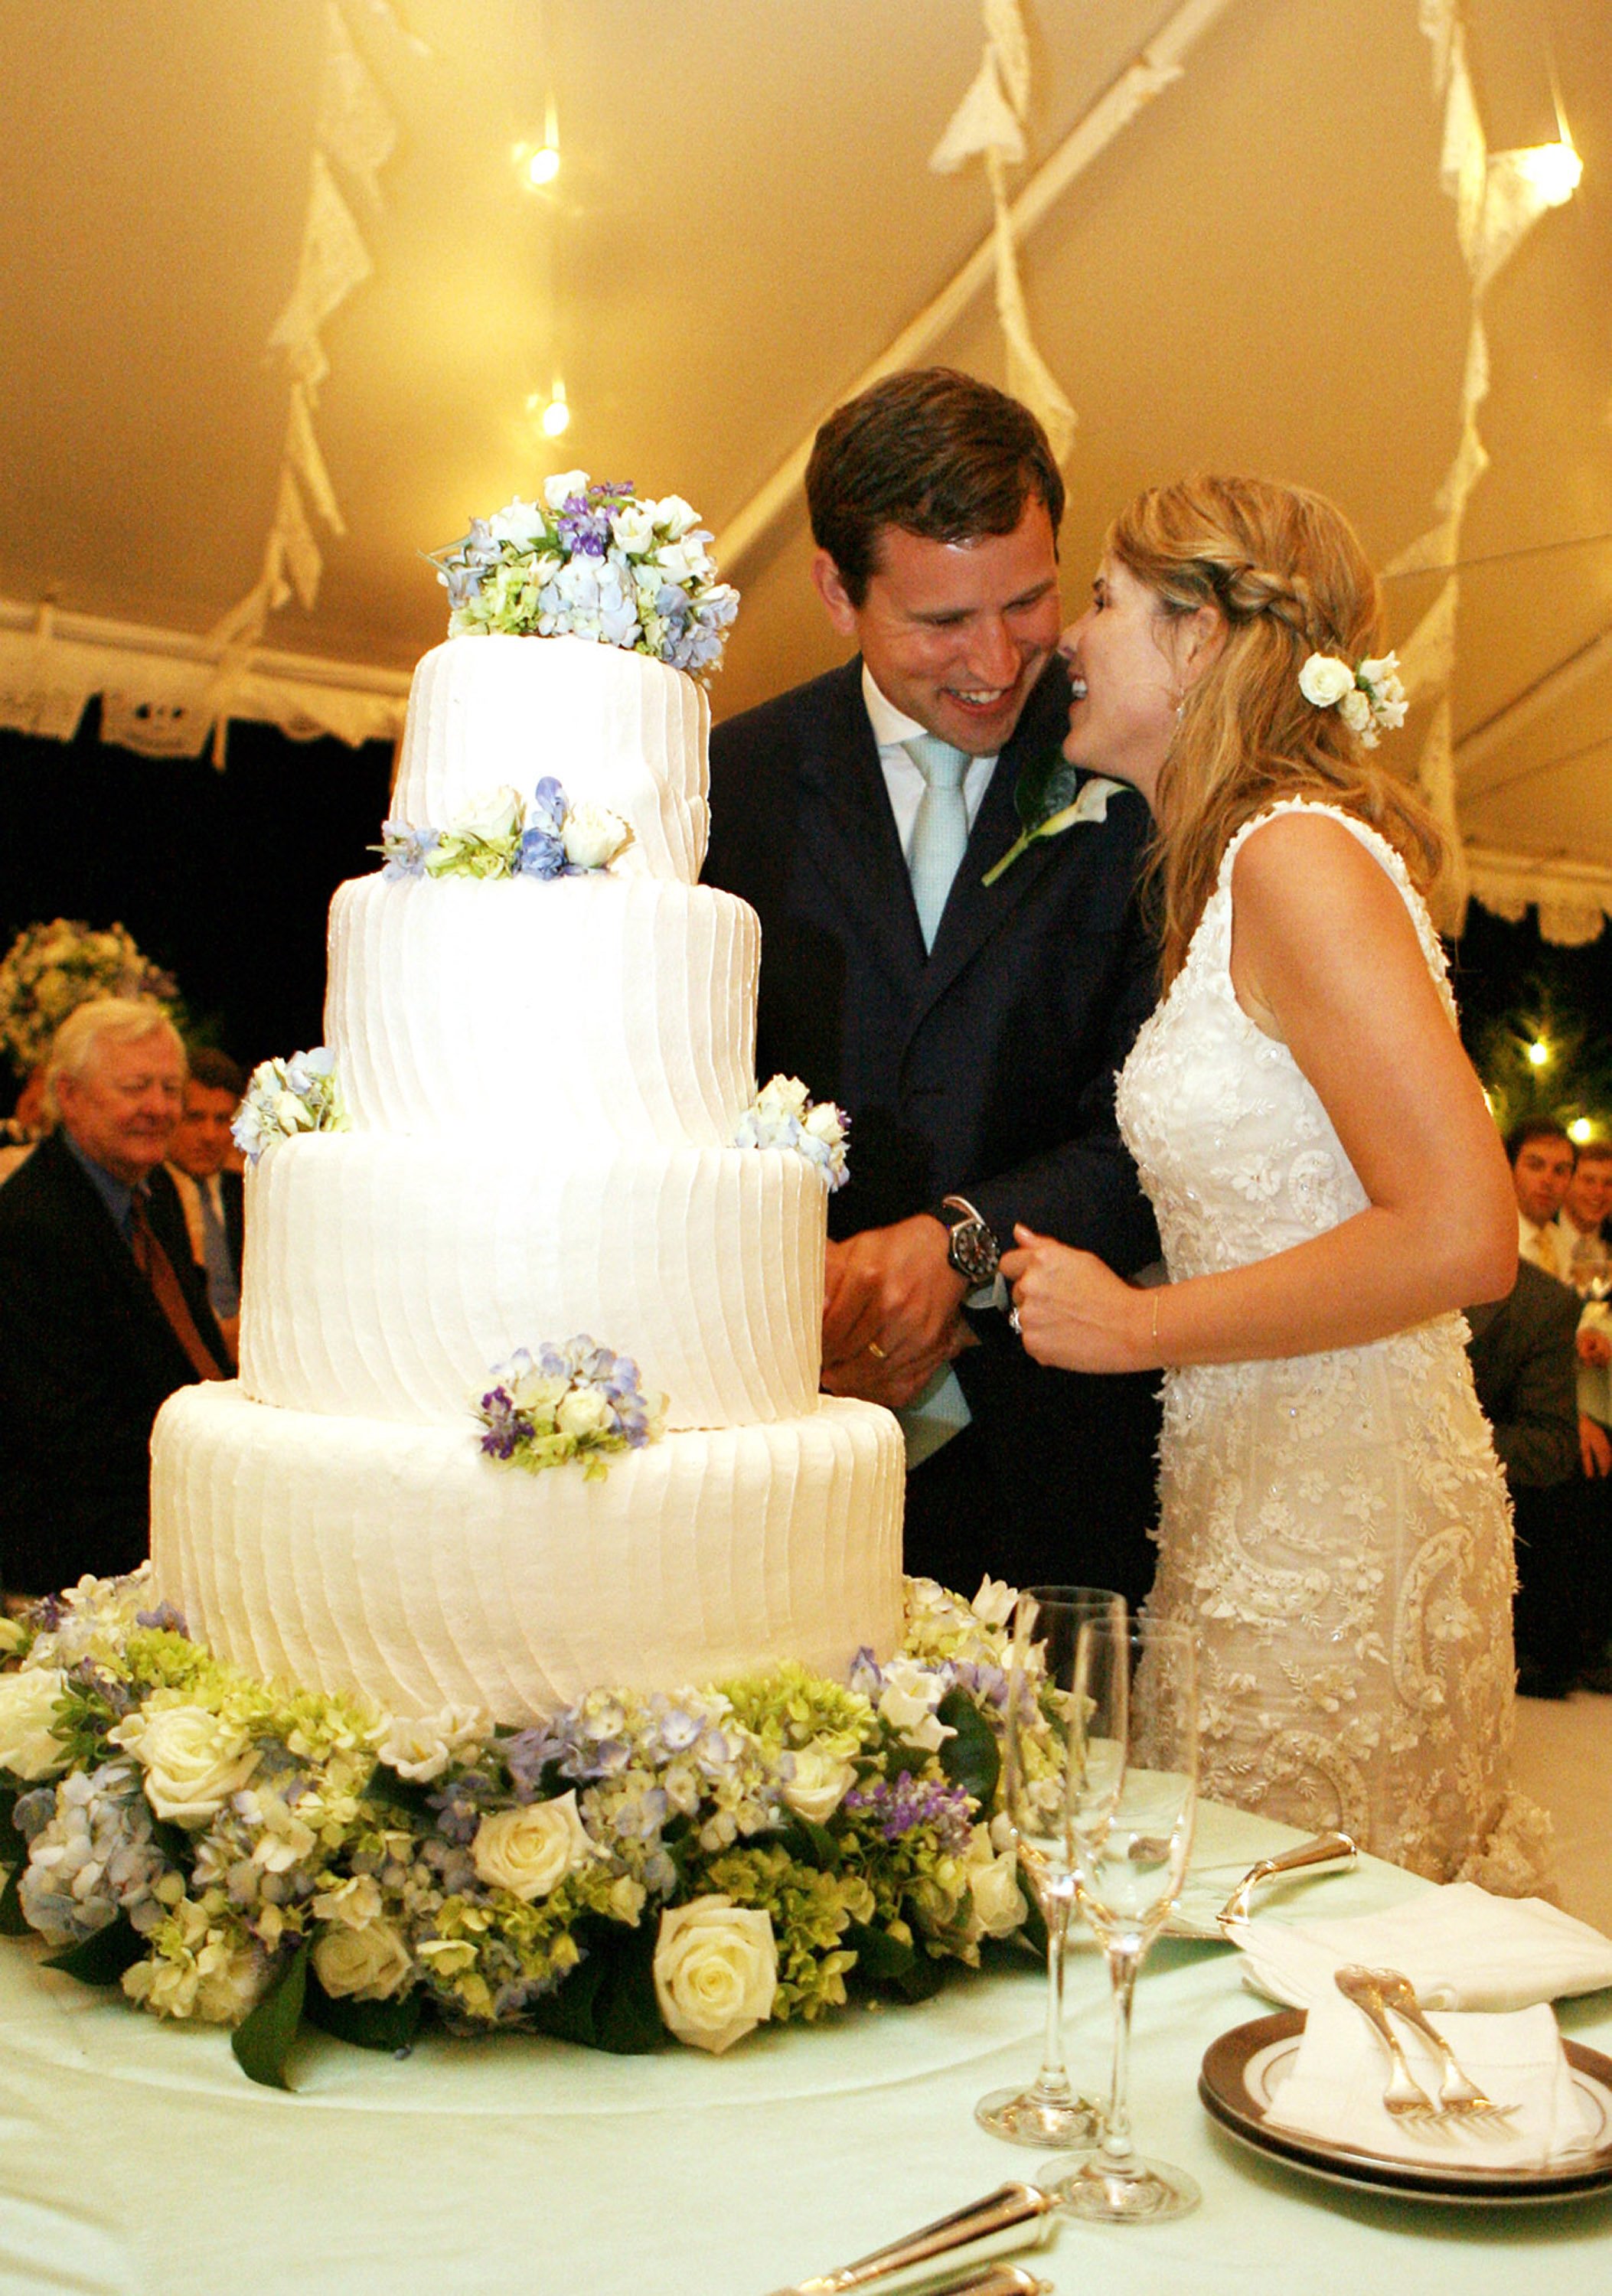 Henry and Jenna Hager cut their wedding cake during a reception in their honor following the ceremony at Prairie Chapel Ranch May 10, 2008 near Crawford, Texas | Source: Getty Images